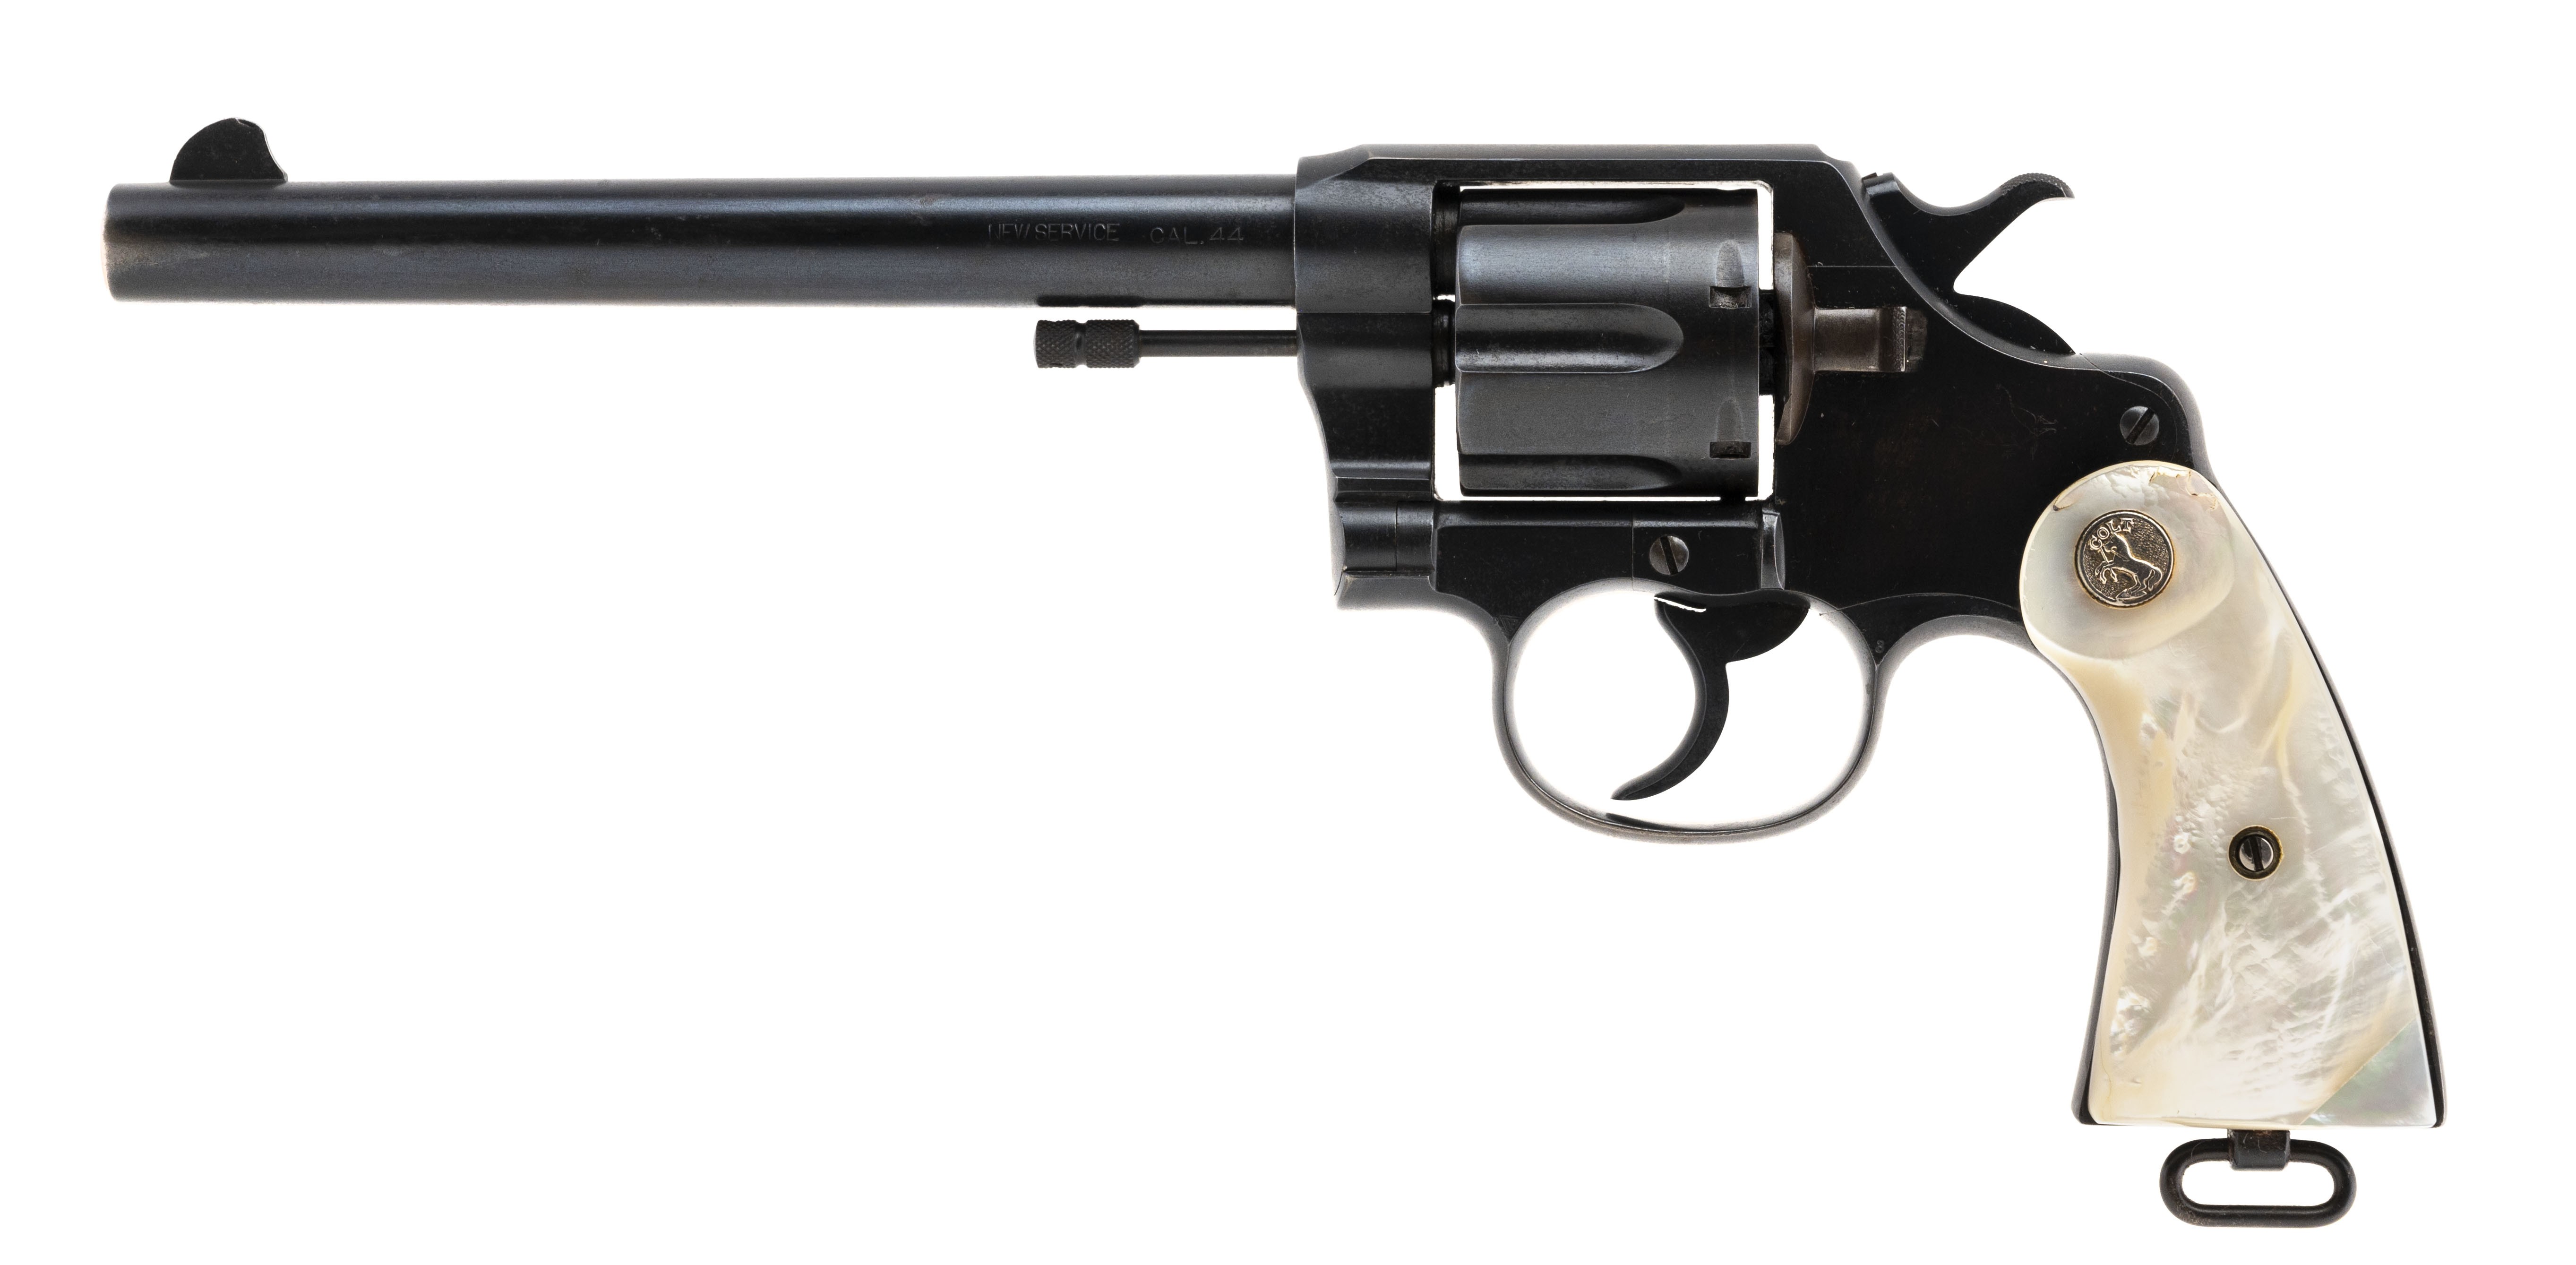 Colt double action revolver with 7.5" barrel. 